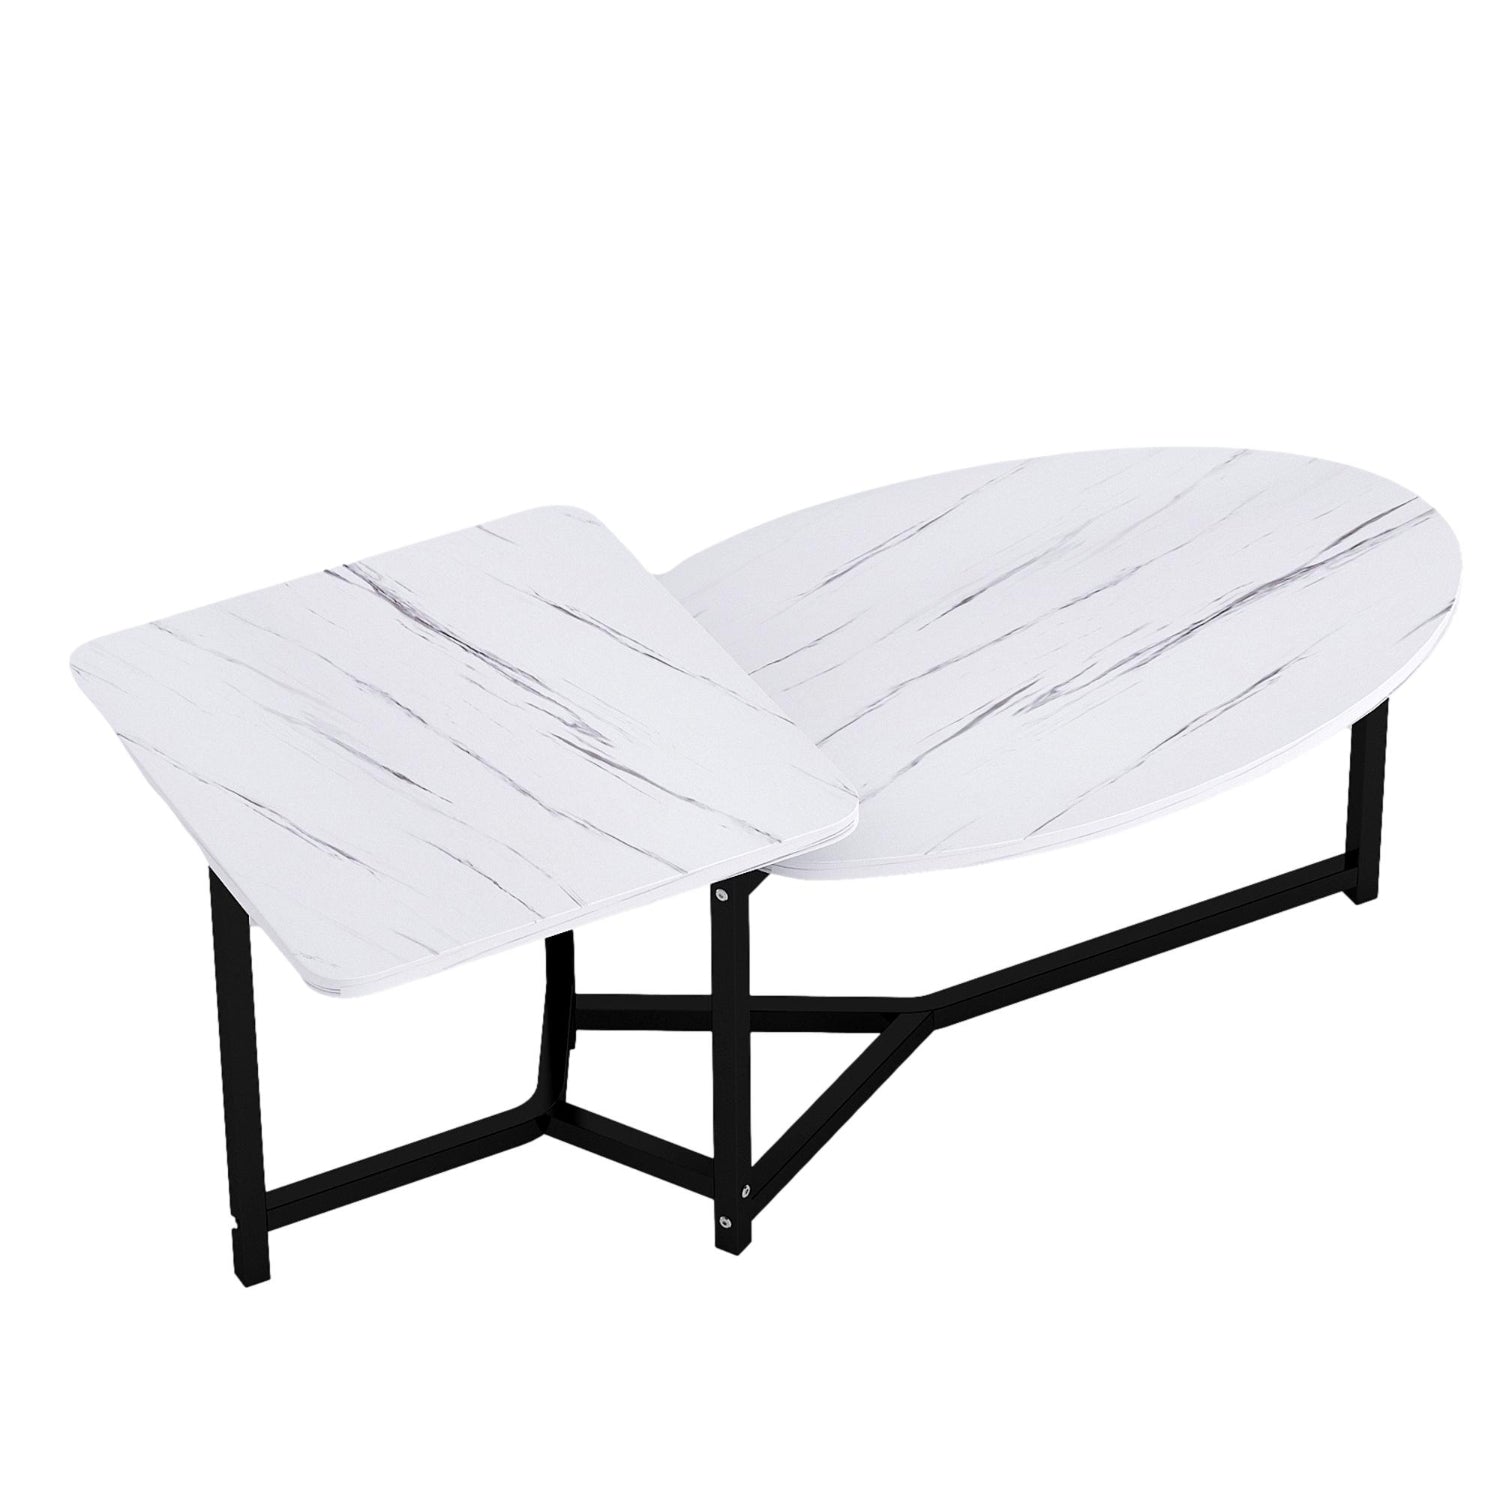 ViscoLogic LUXEM Contemporary Unique Nested Coffee Table, Center Table For Living Room (White)